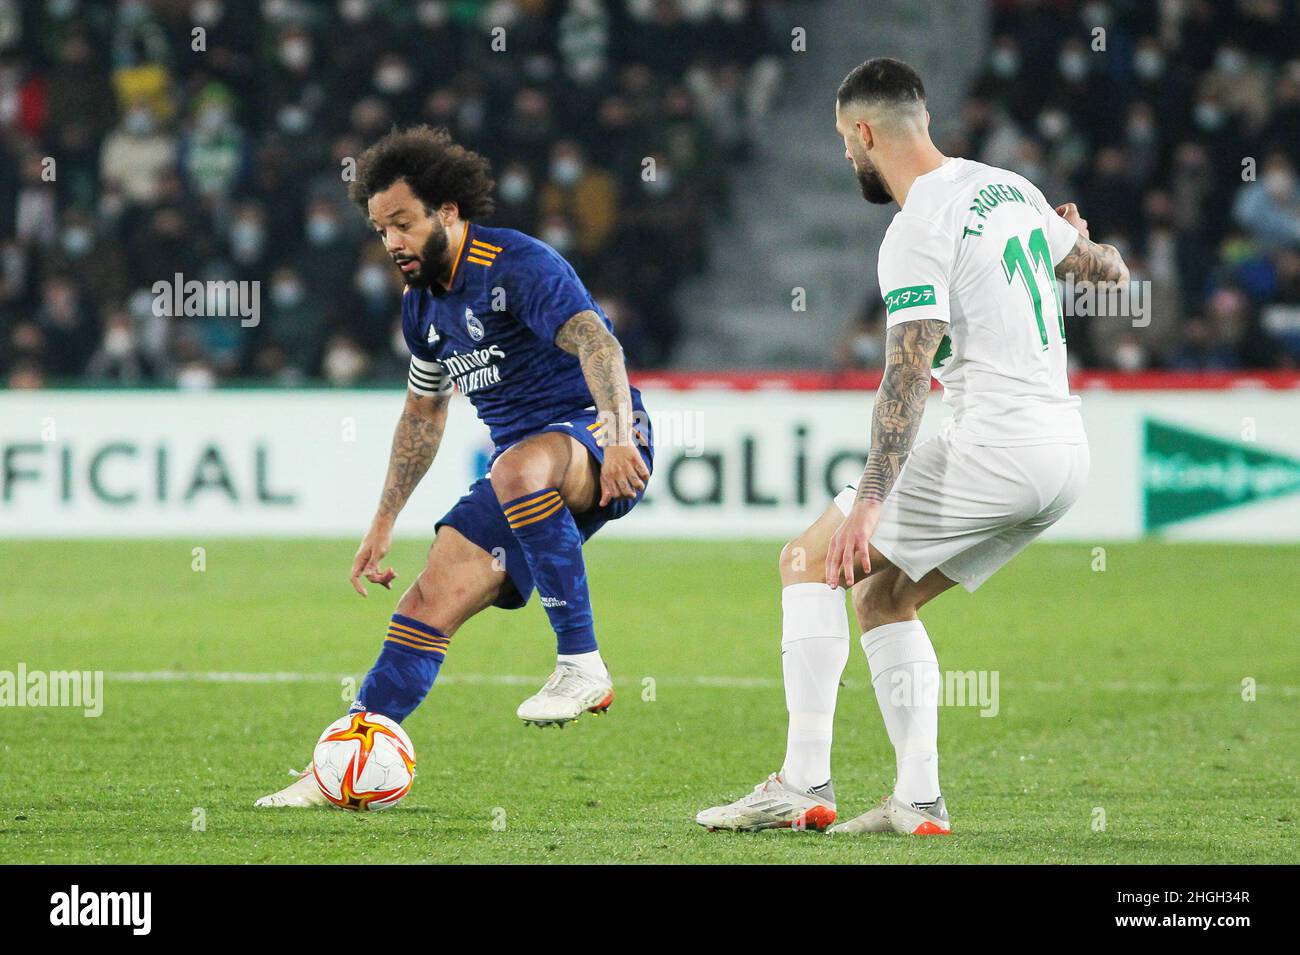 Elche, Alicante, Spain. 20th Jan, 2022. Marcelo Vieira Da Silva of Real Madrid and Tete Morente of Elche during the Spanish Cup, Copa del Rey, round of 16 football match between Elche CF and Real Madrid on January 20, 2022 at Martinez Valero stadium in Elche, Alicante, Spain - Photo: Irh/DPPI/LiveMedia Credit: Independent Photo Agency/Alamy Live News Stock Photo